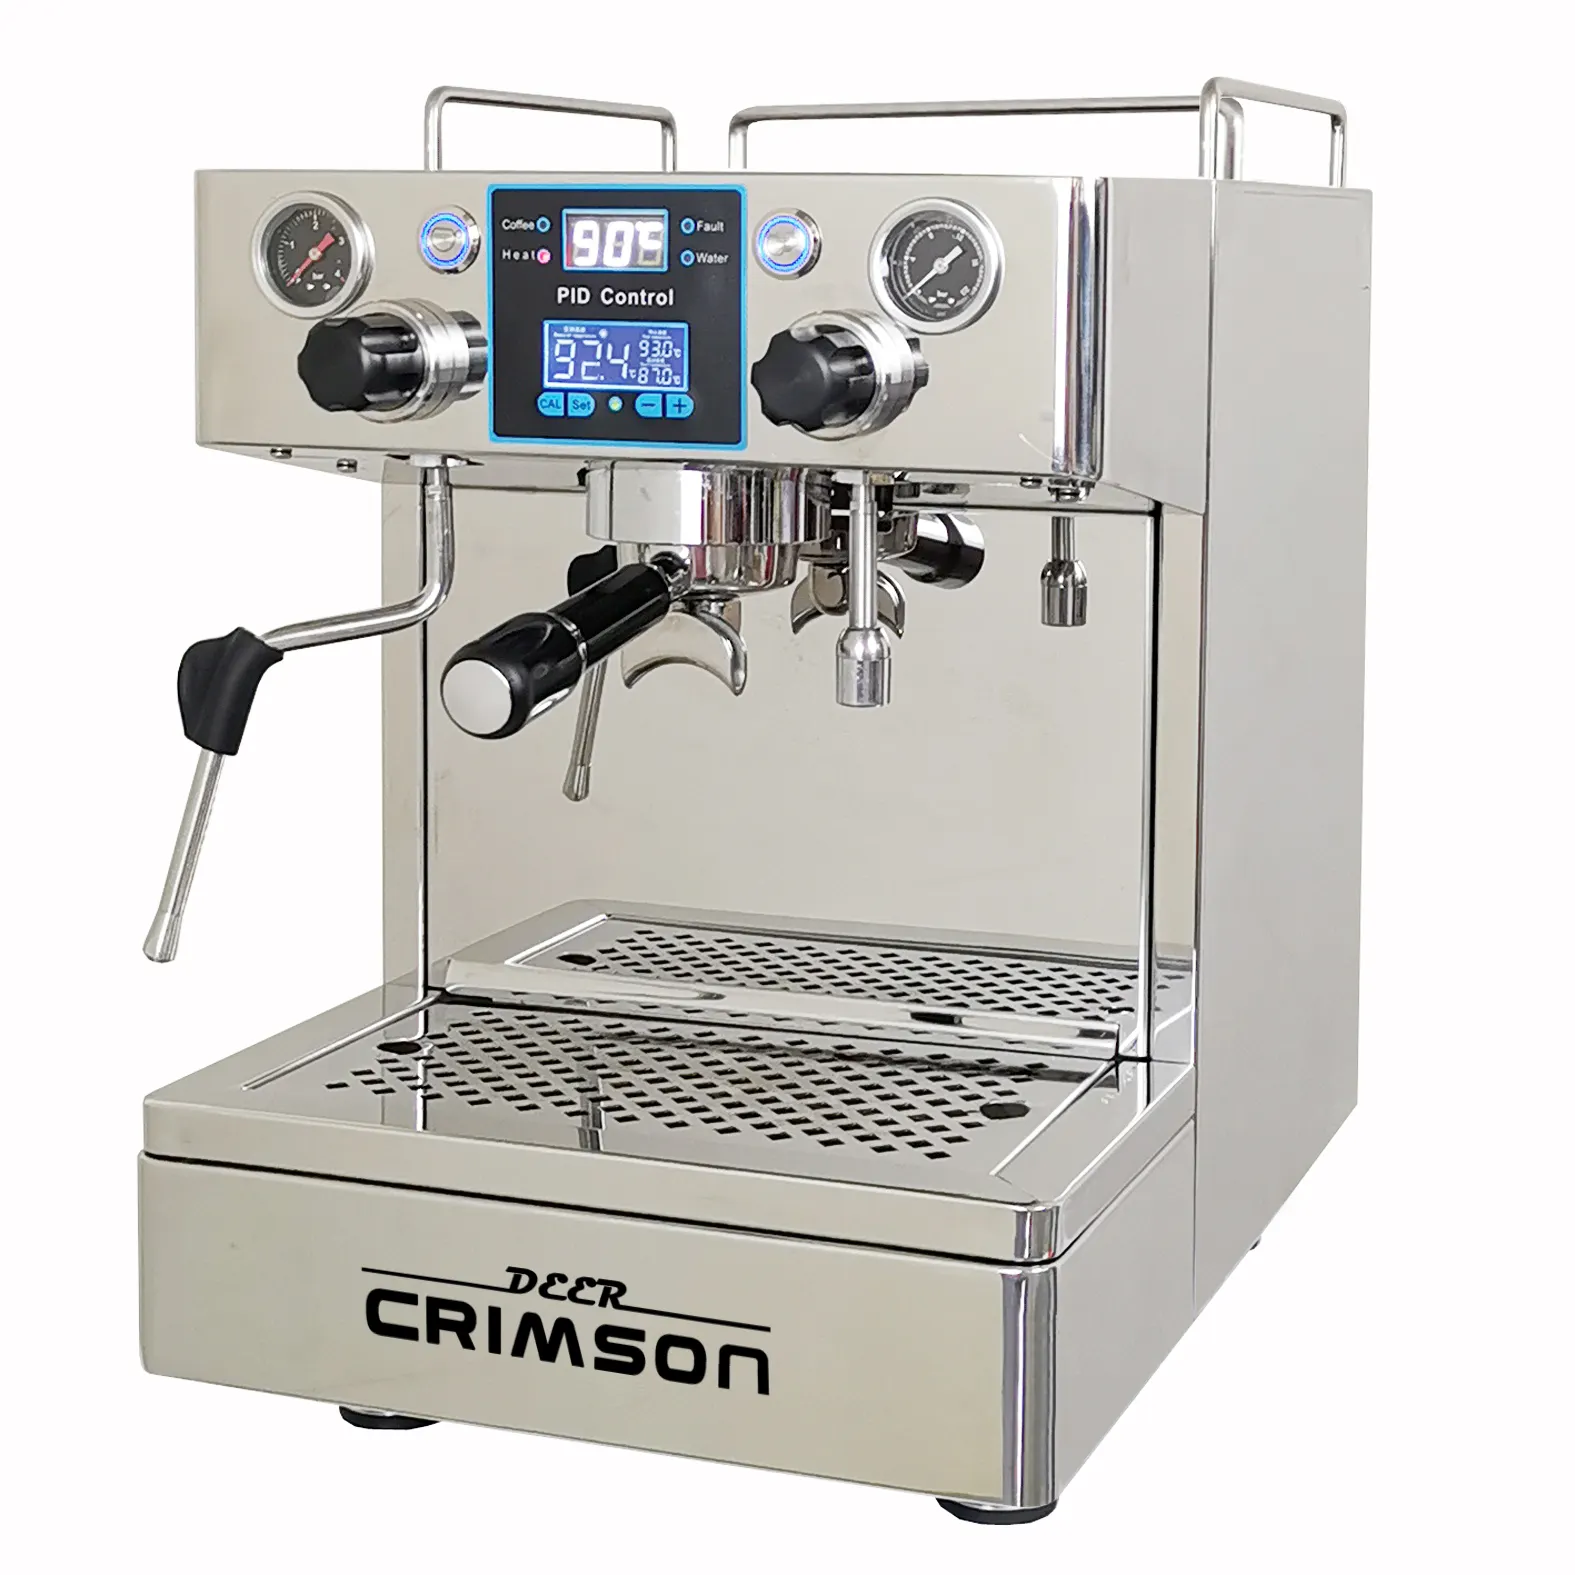 Hot sale family & Commerical Espresso Latte SEMI- AUTOMATIC stainless steel personalized coffee machine